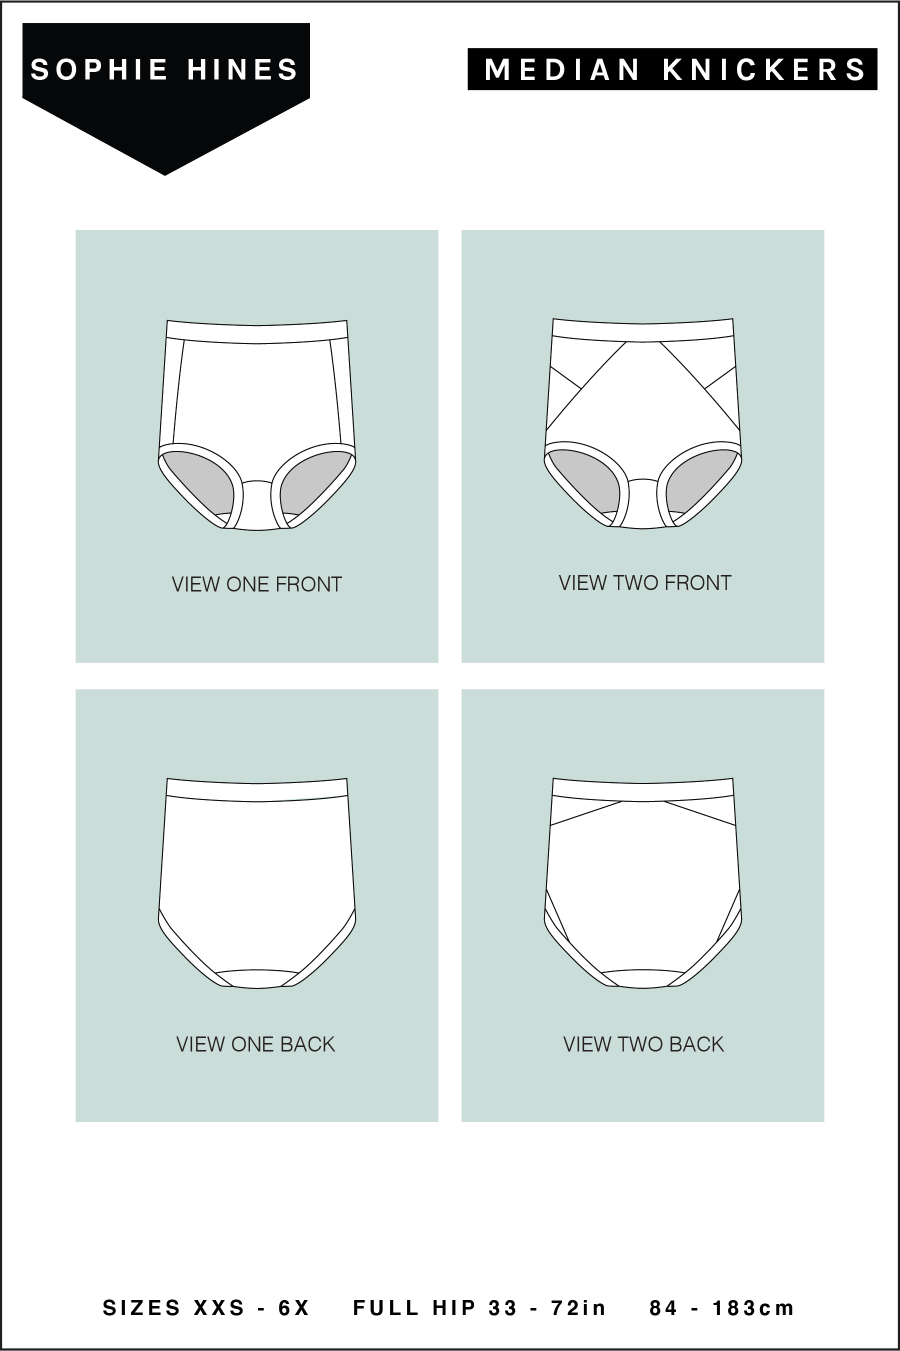 Median Knickers Pattern By Sophie Hines